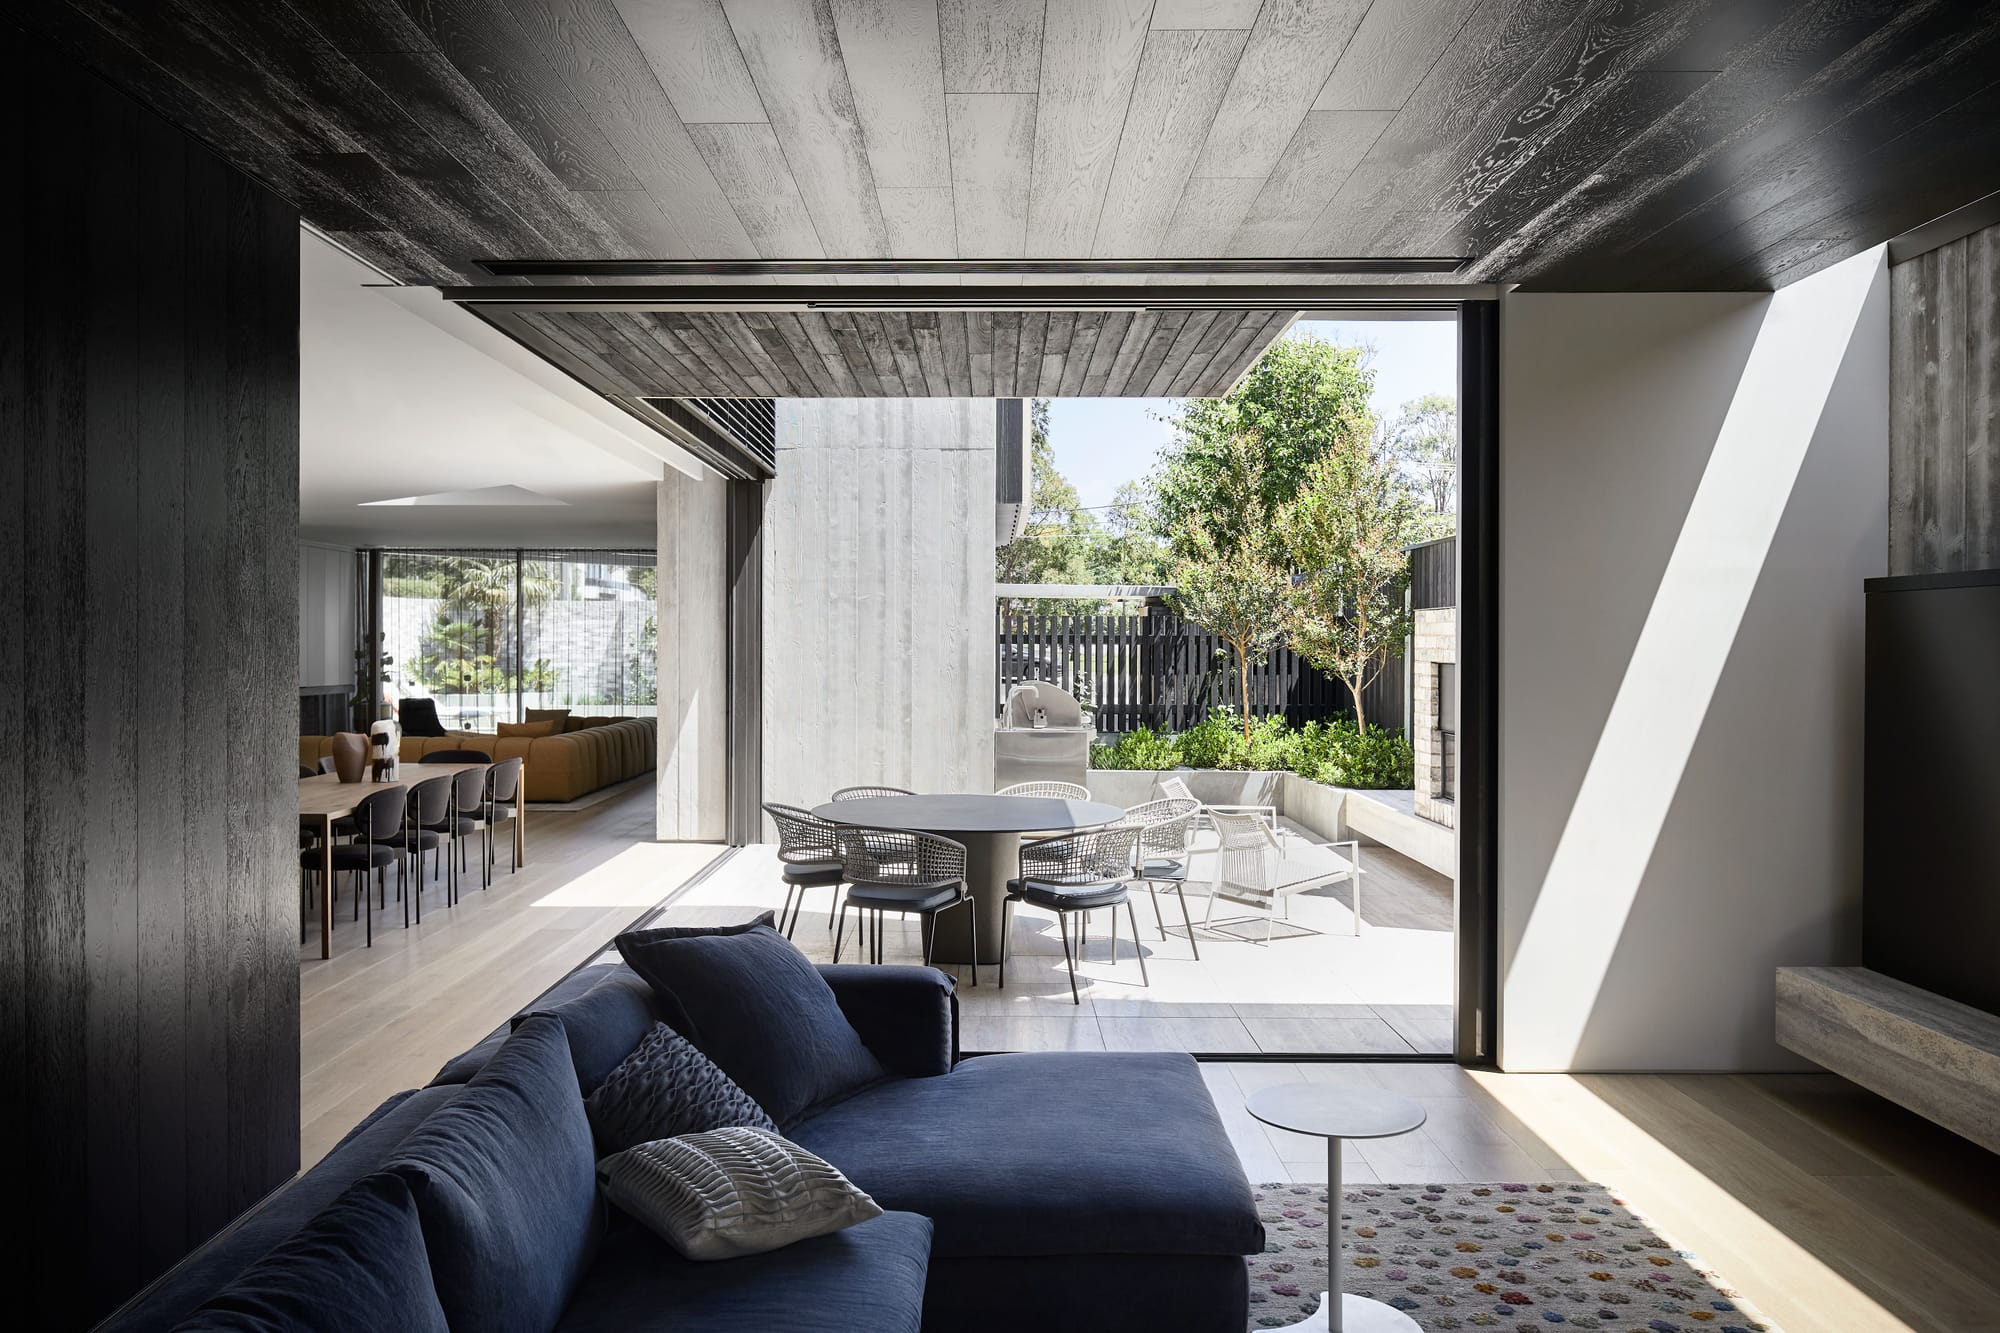 The Split Home by Seidler Group. Copyright of Seidler Group. Living room opening onto external courtyard with outdoor dining setting. Navy couch inside and black timber walls and ceilings.